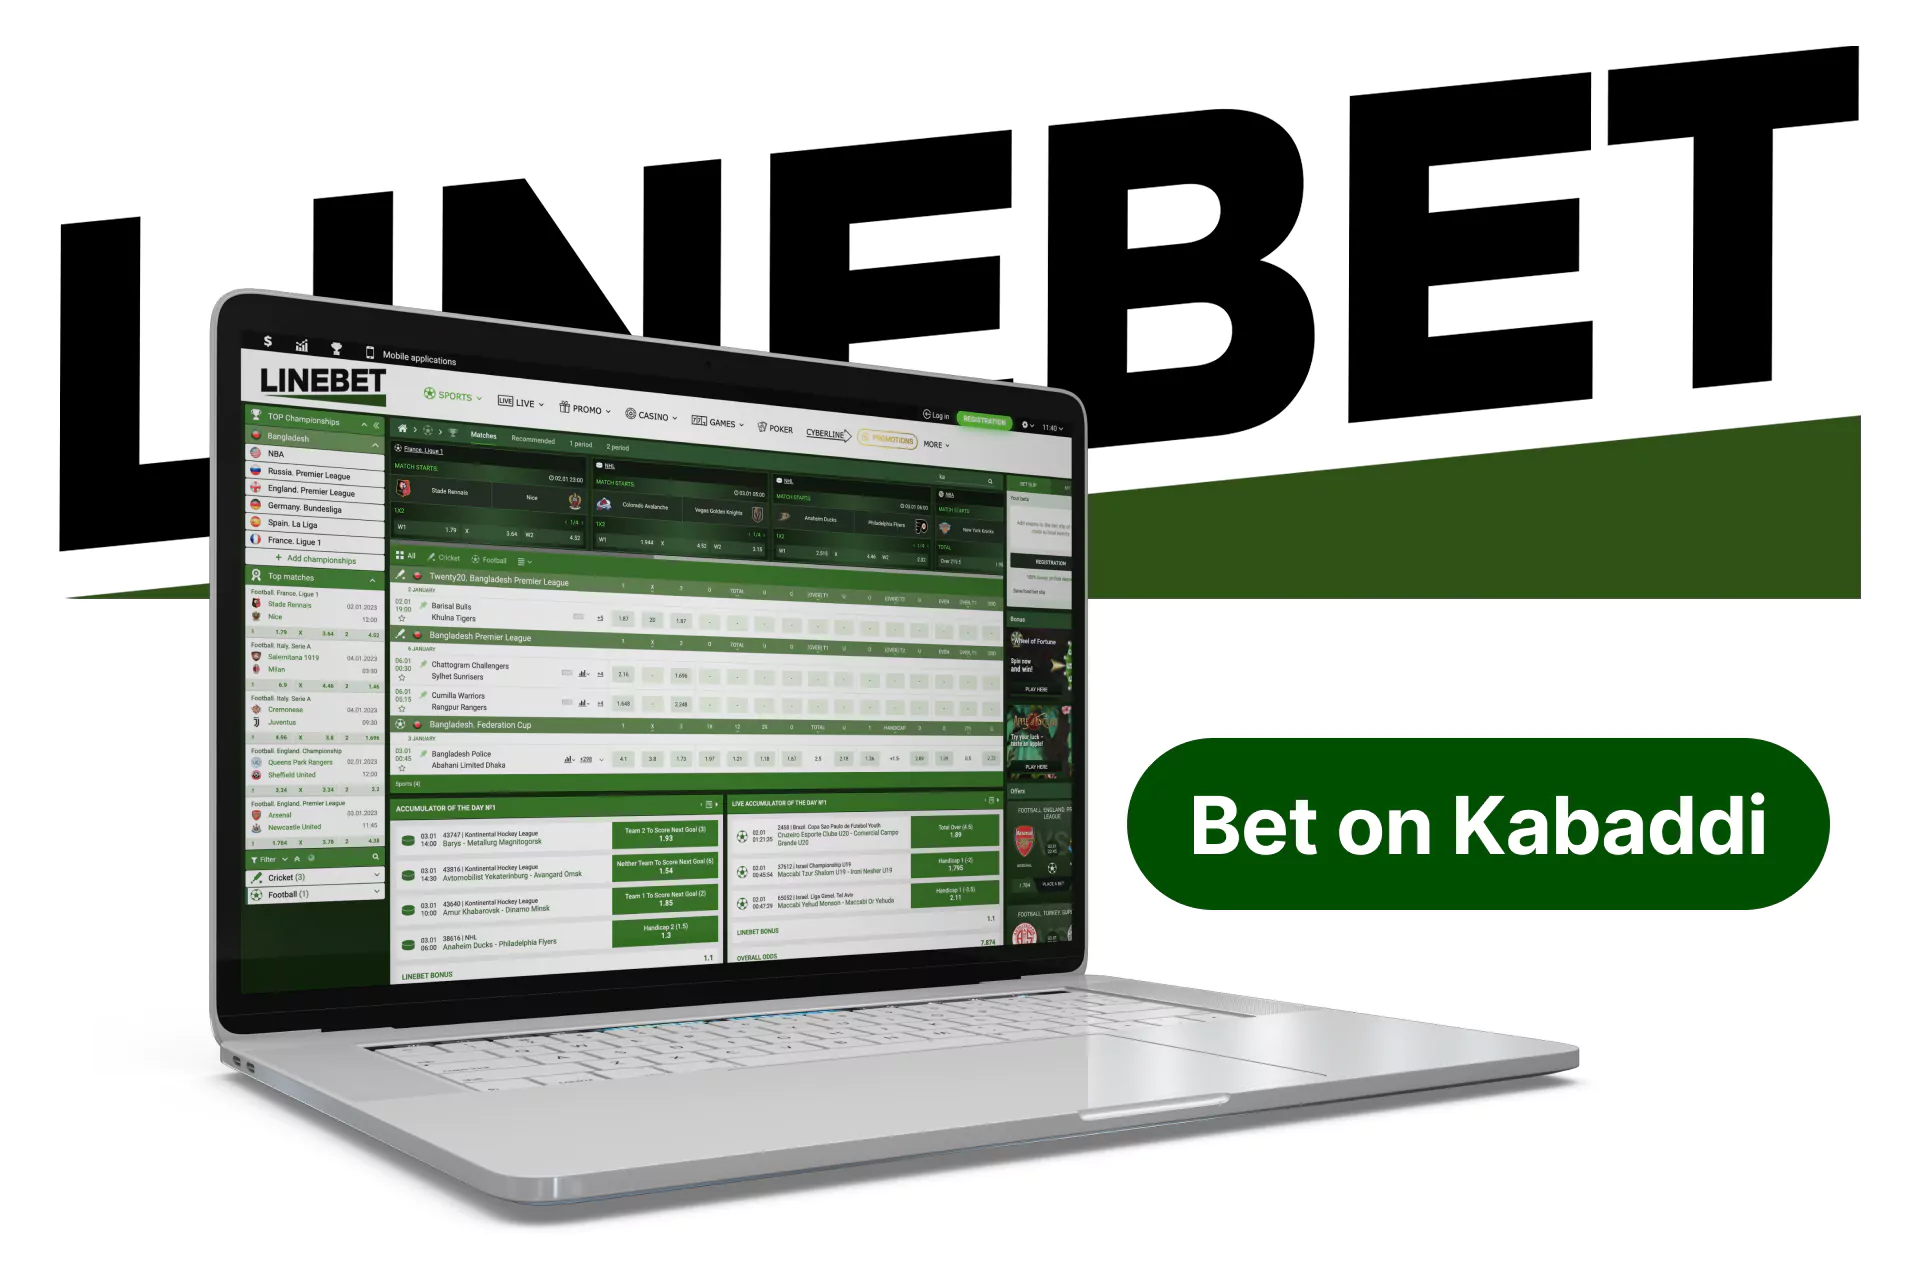 With this guide, learn how to quickly and easily start betting with Linebet on Kabaddi.